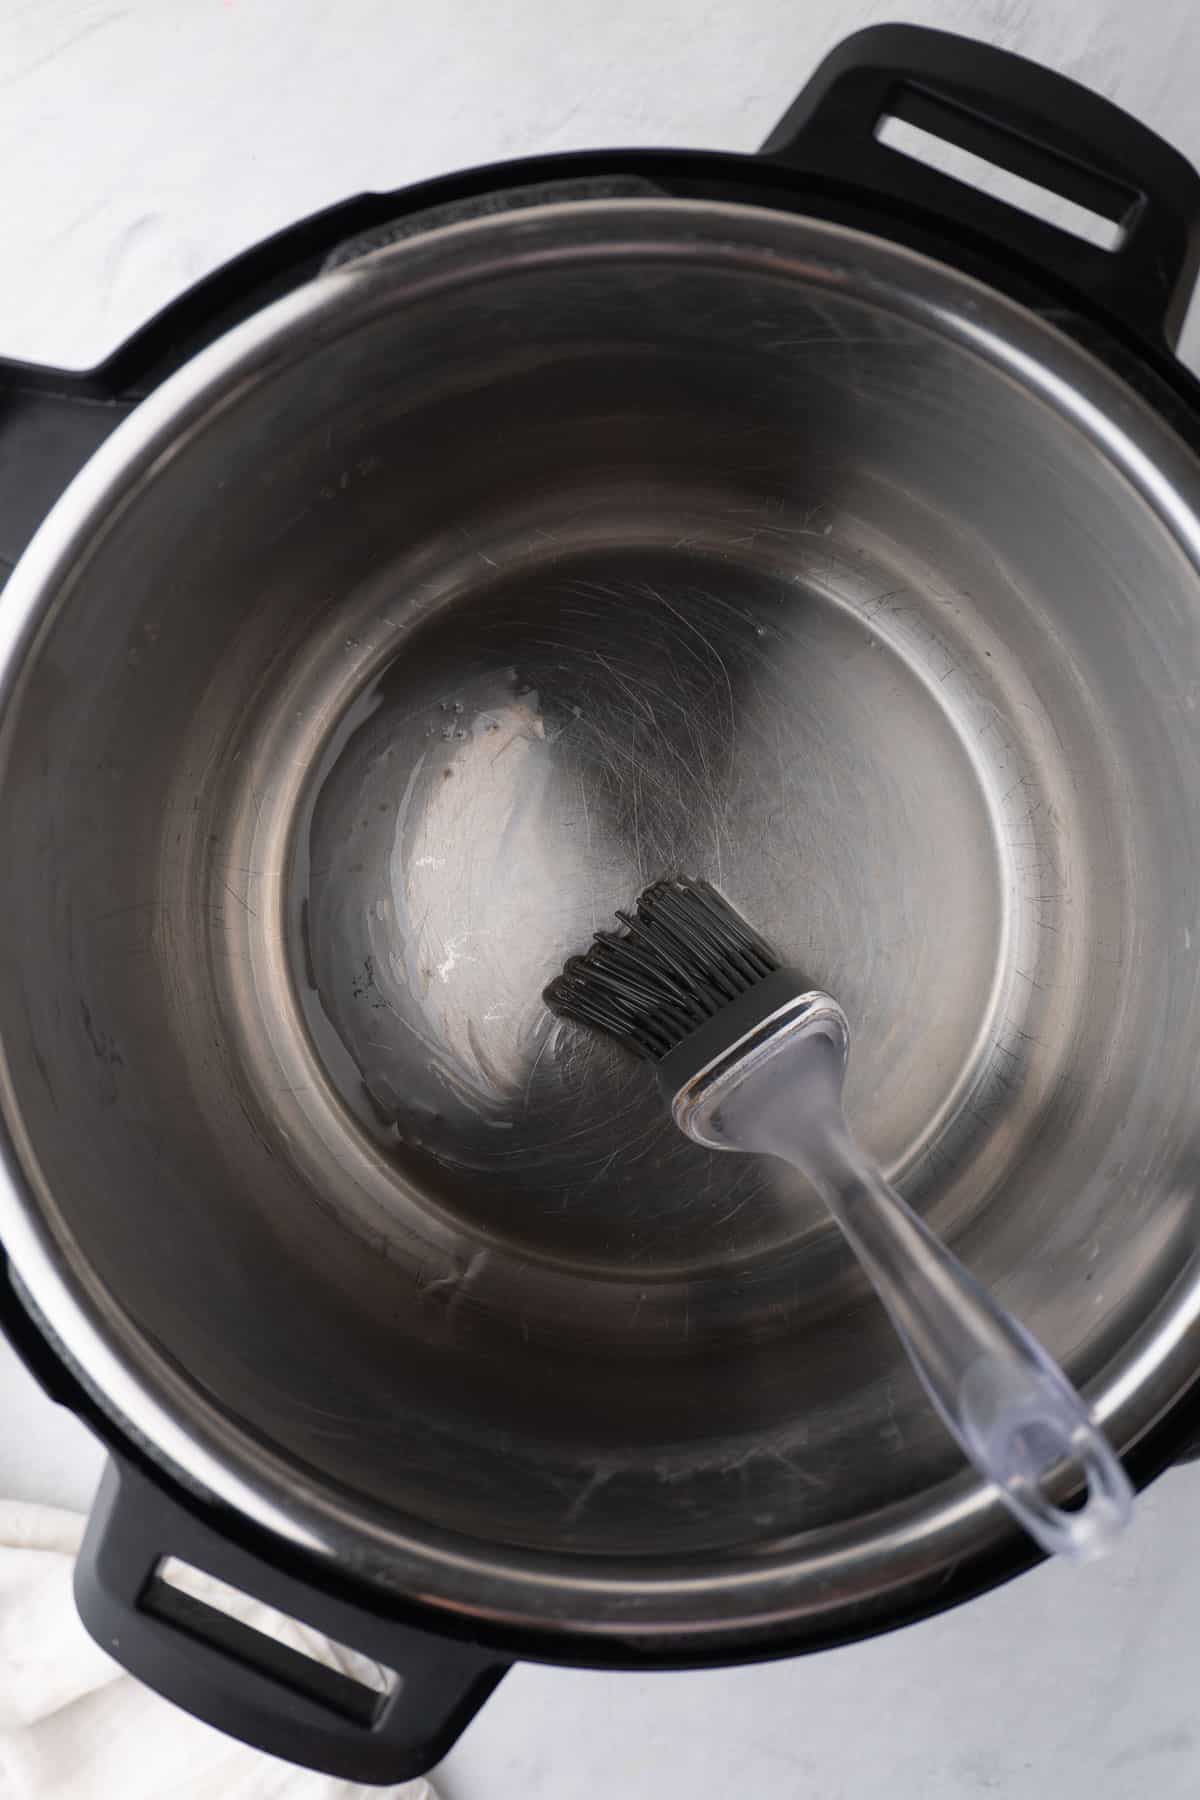 a silicon brush brushing oil over the bottom of the Instant Pot before adding the other ingredients